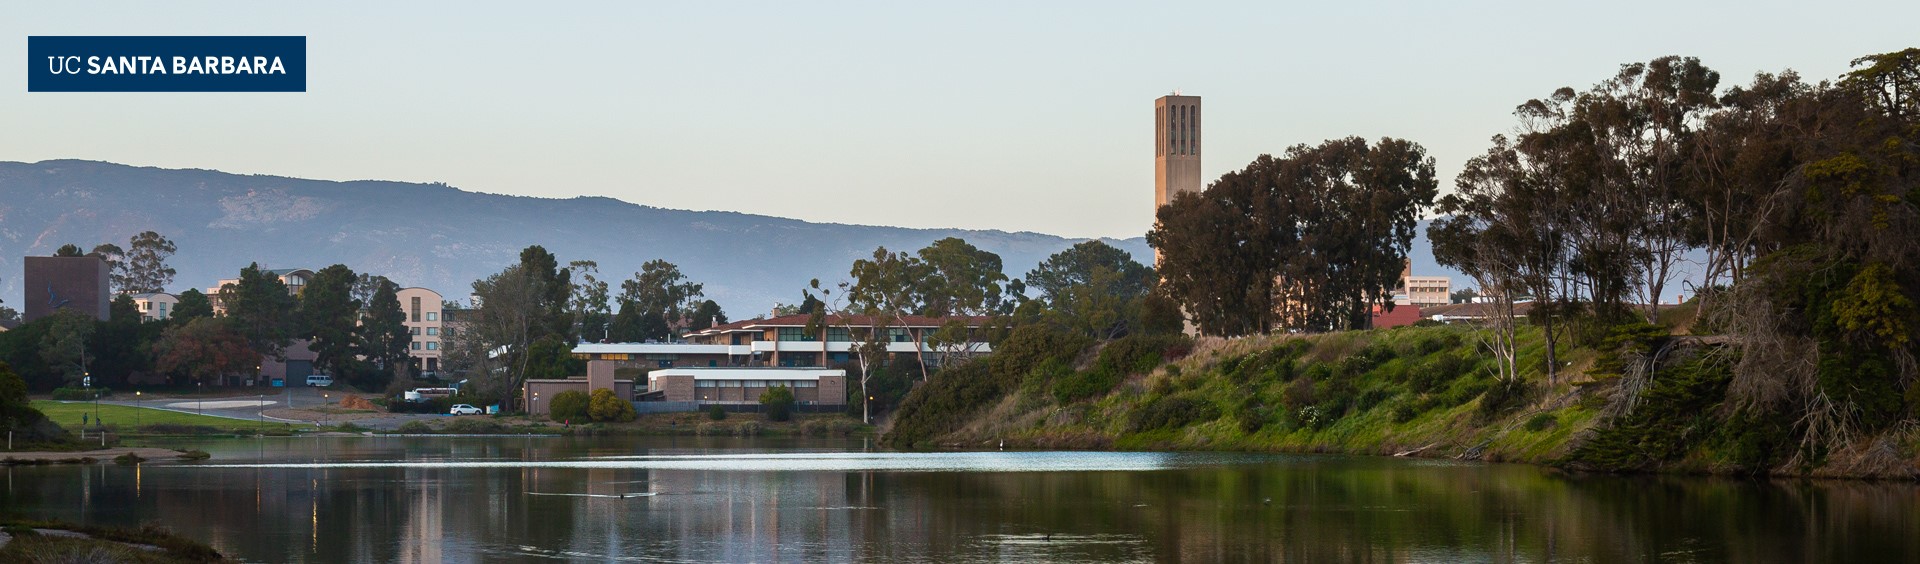 UCSB Storke Tower